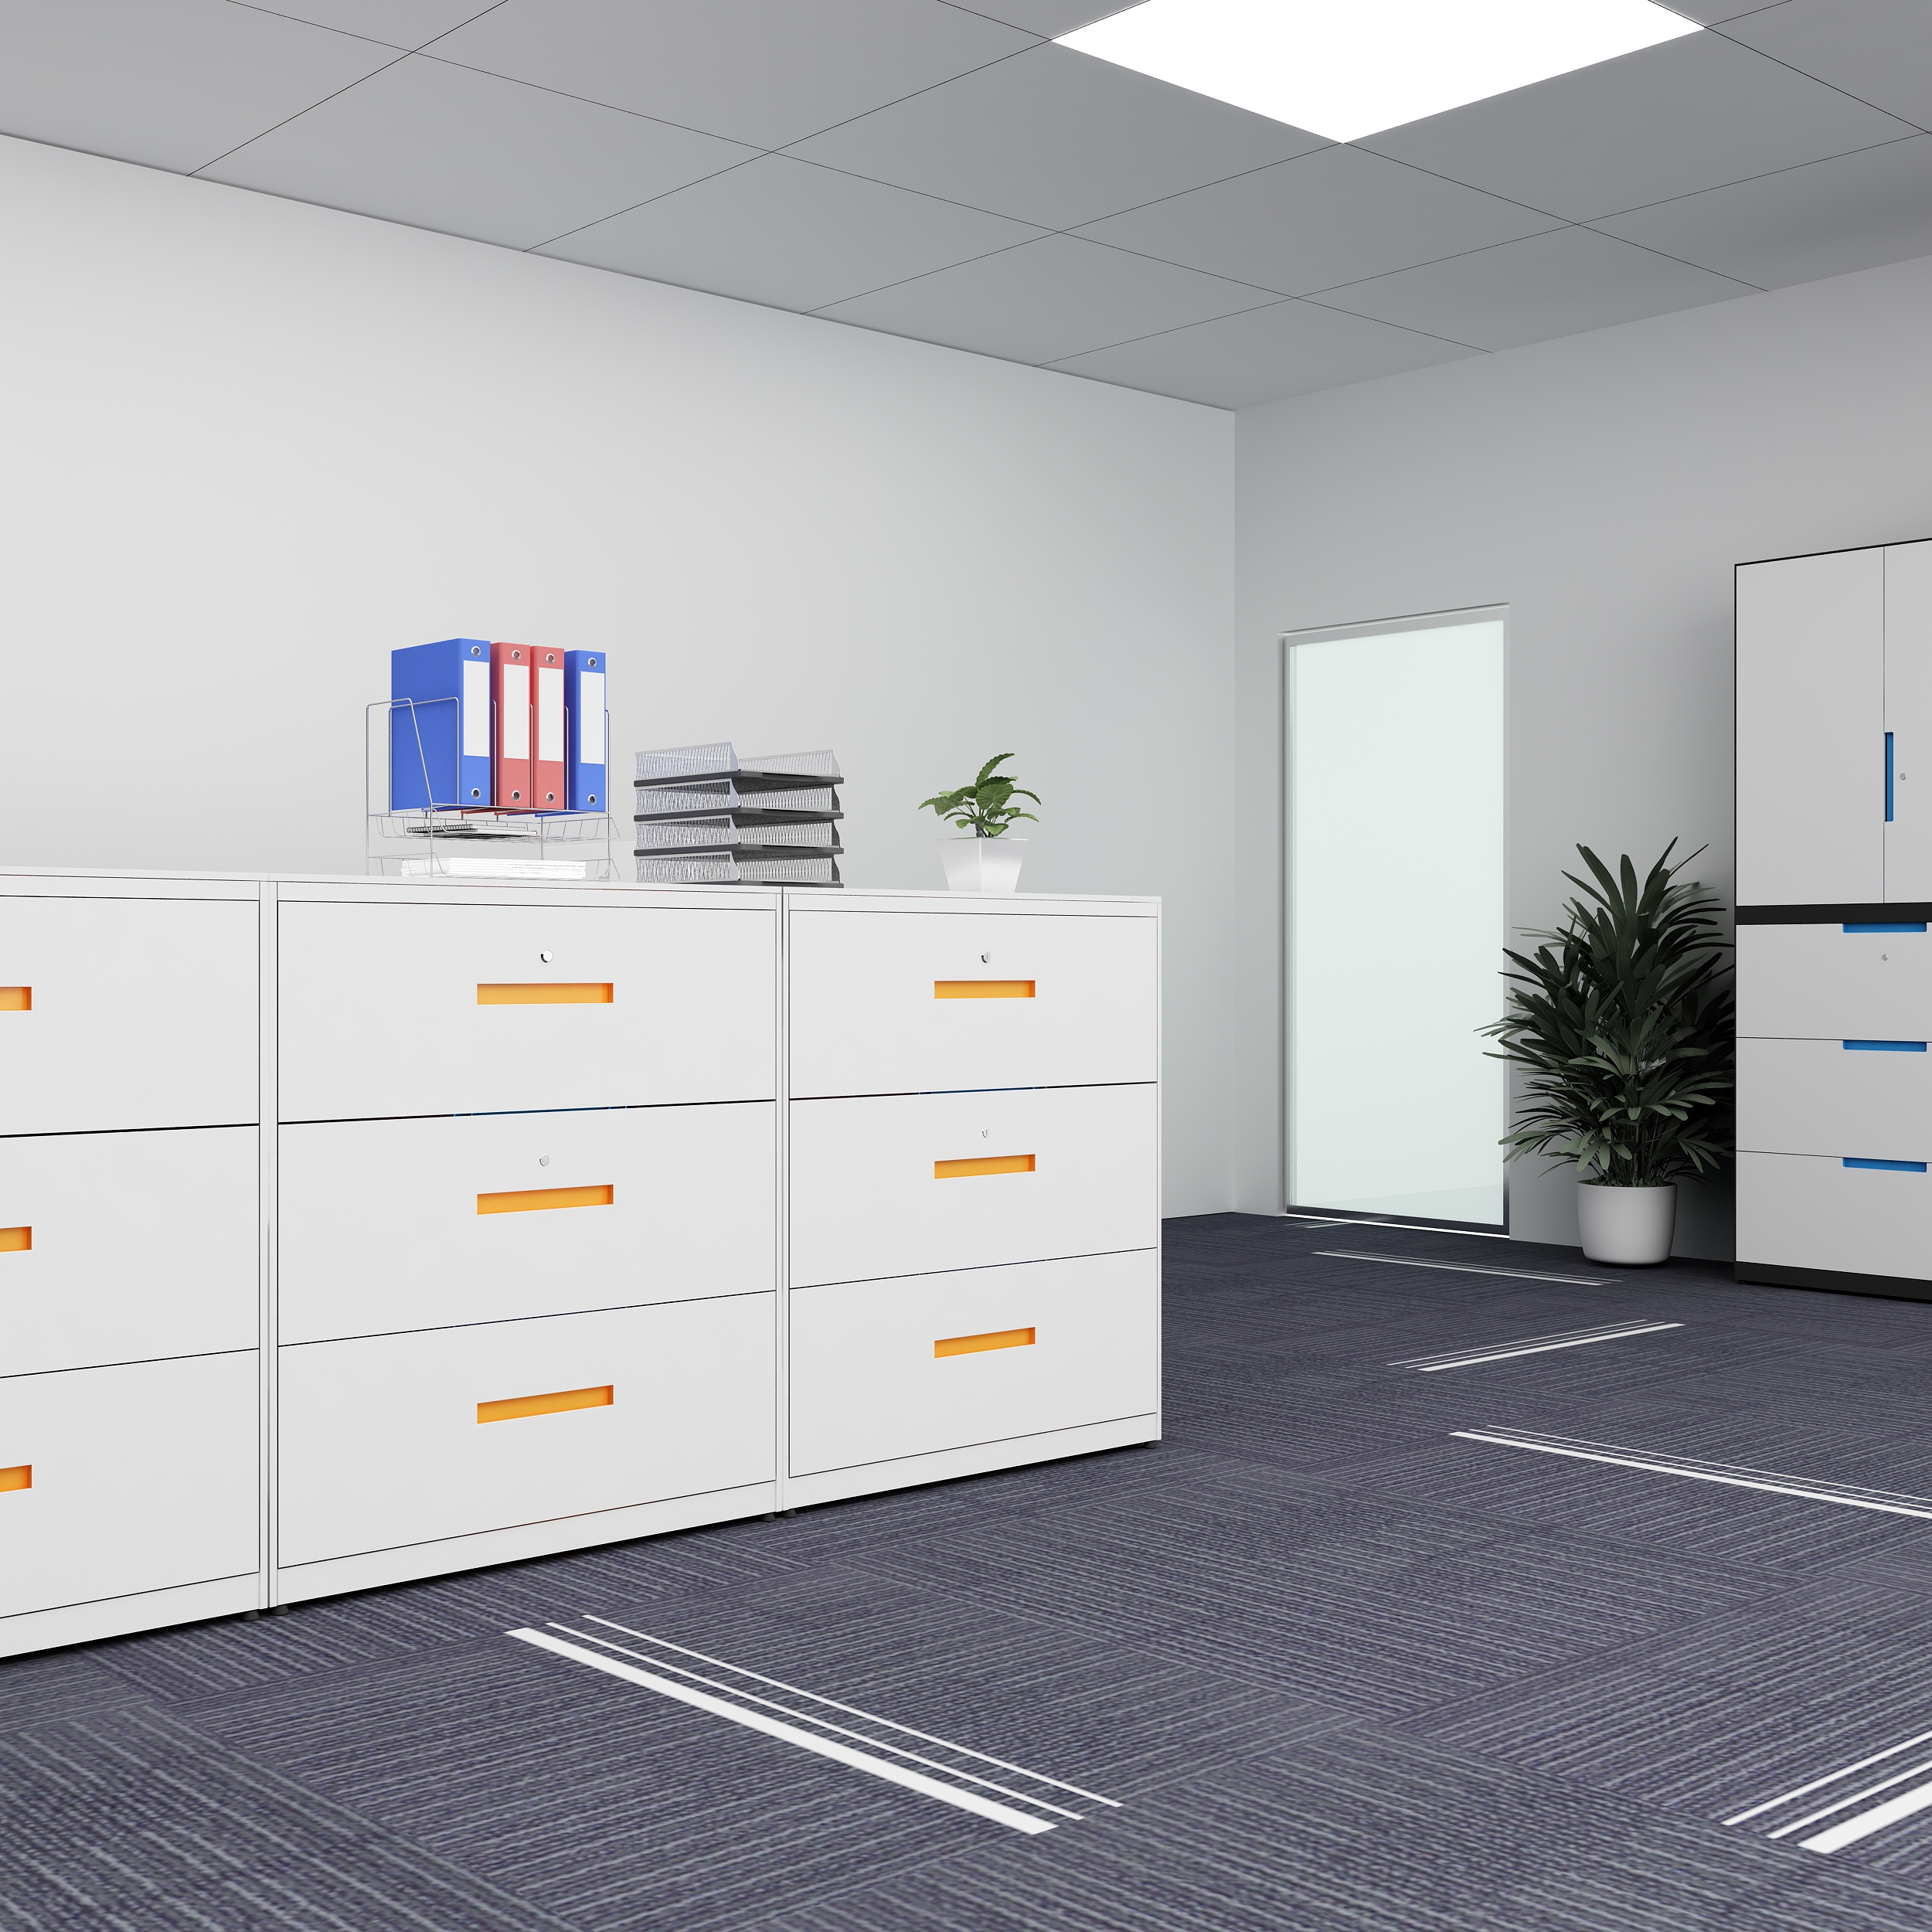 Lateral filing cabinet